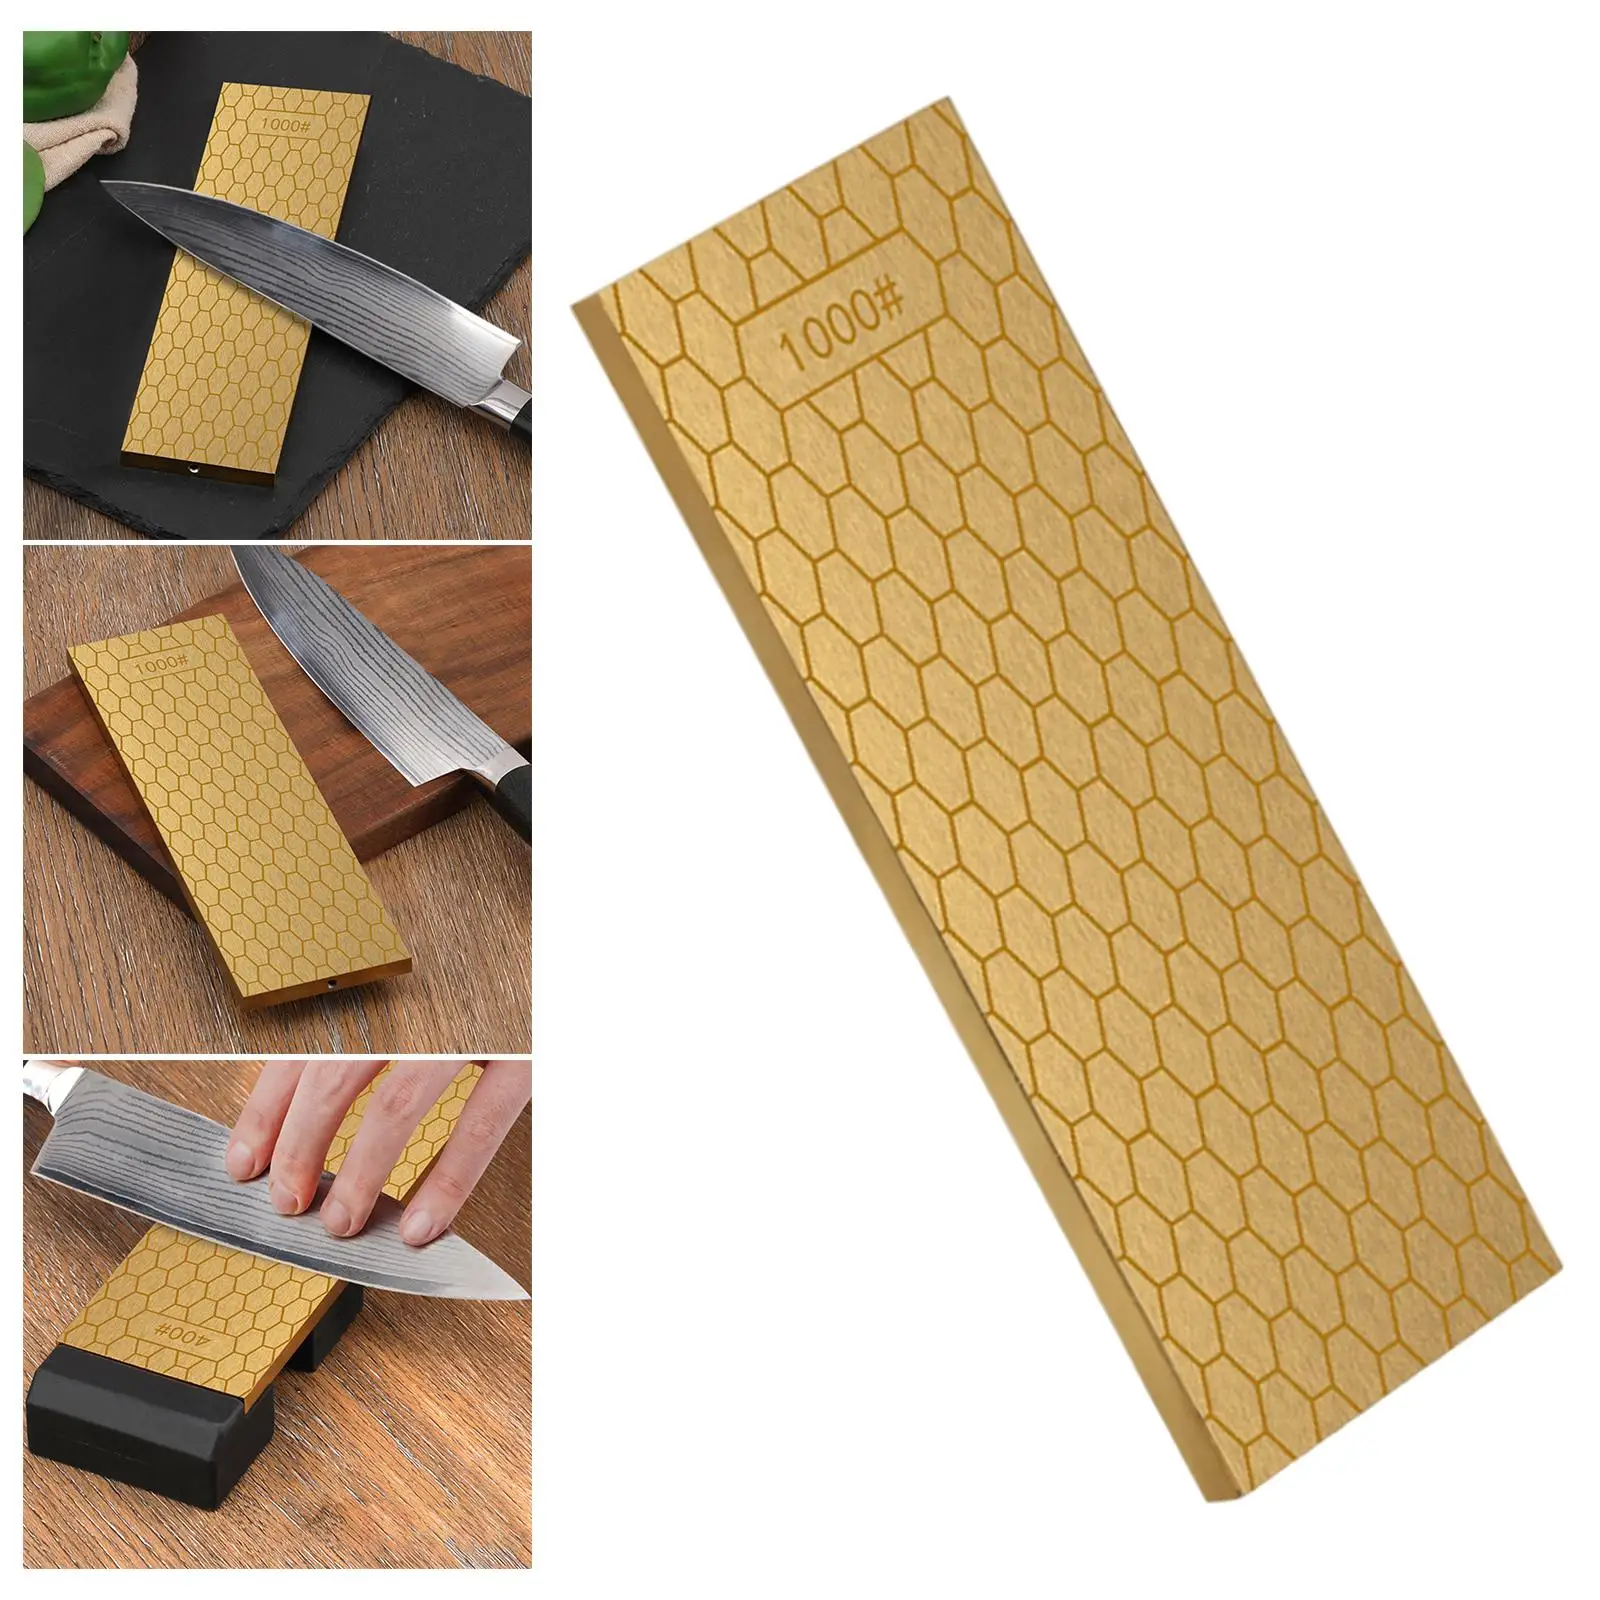 Diamond Sharpening Stone Plate Sharpening Stone Professional Stone for Kitchen Sharpening Dull Blunt or Tired Edge 400 Grit Tool